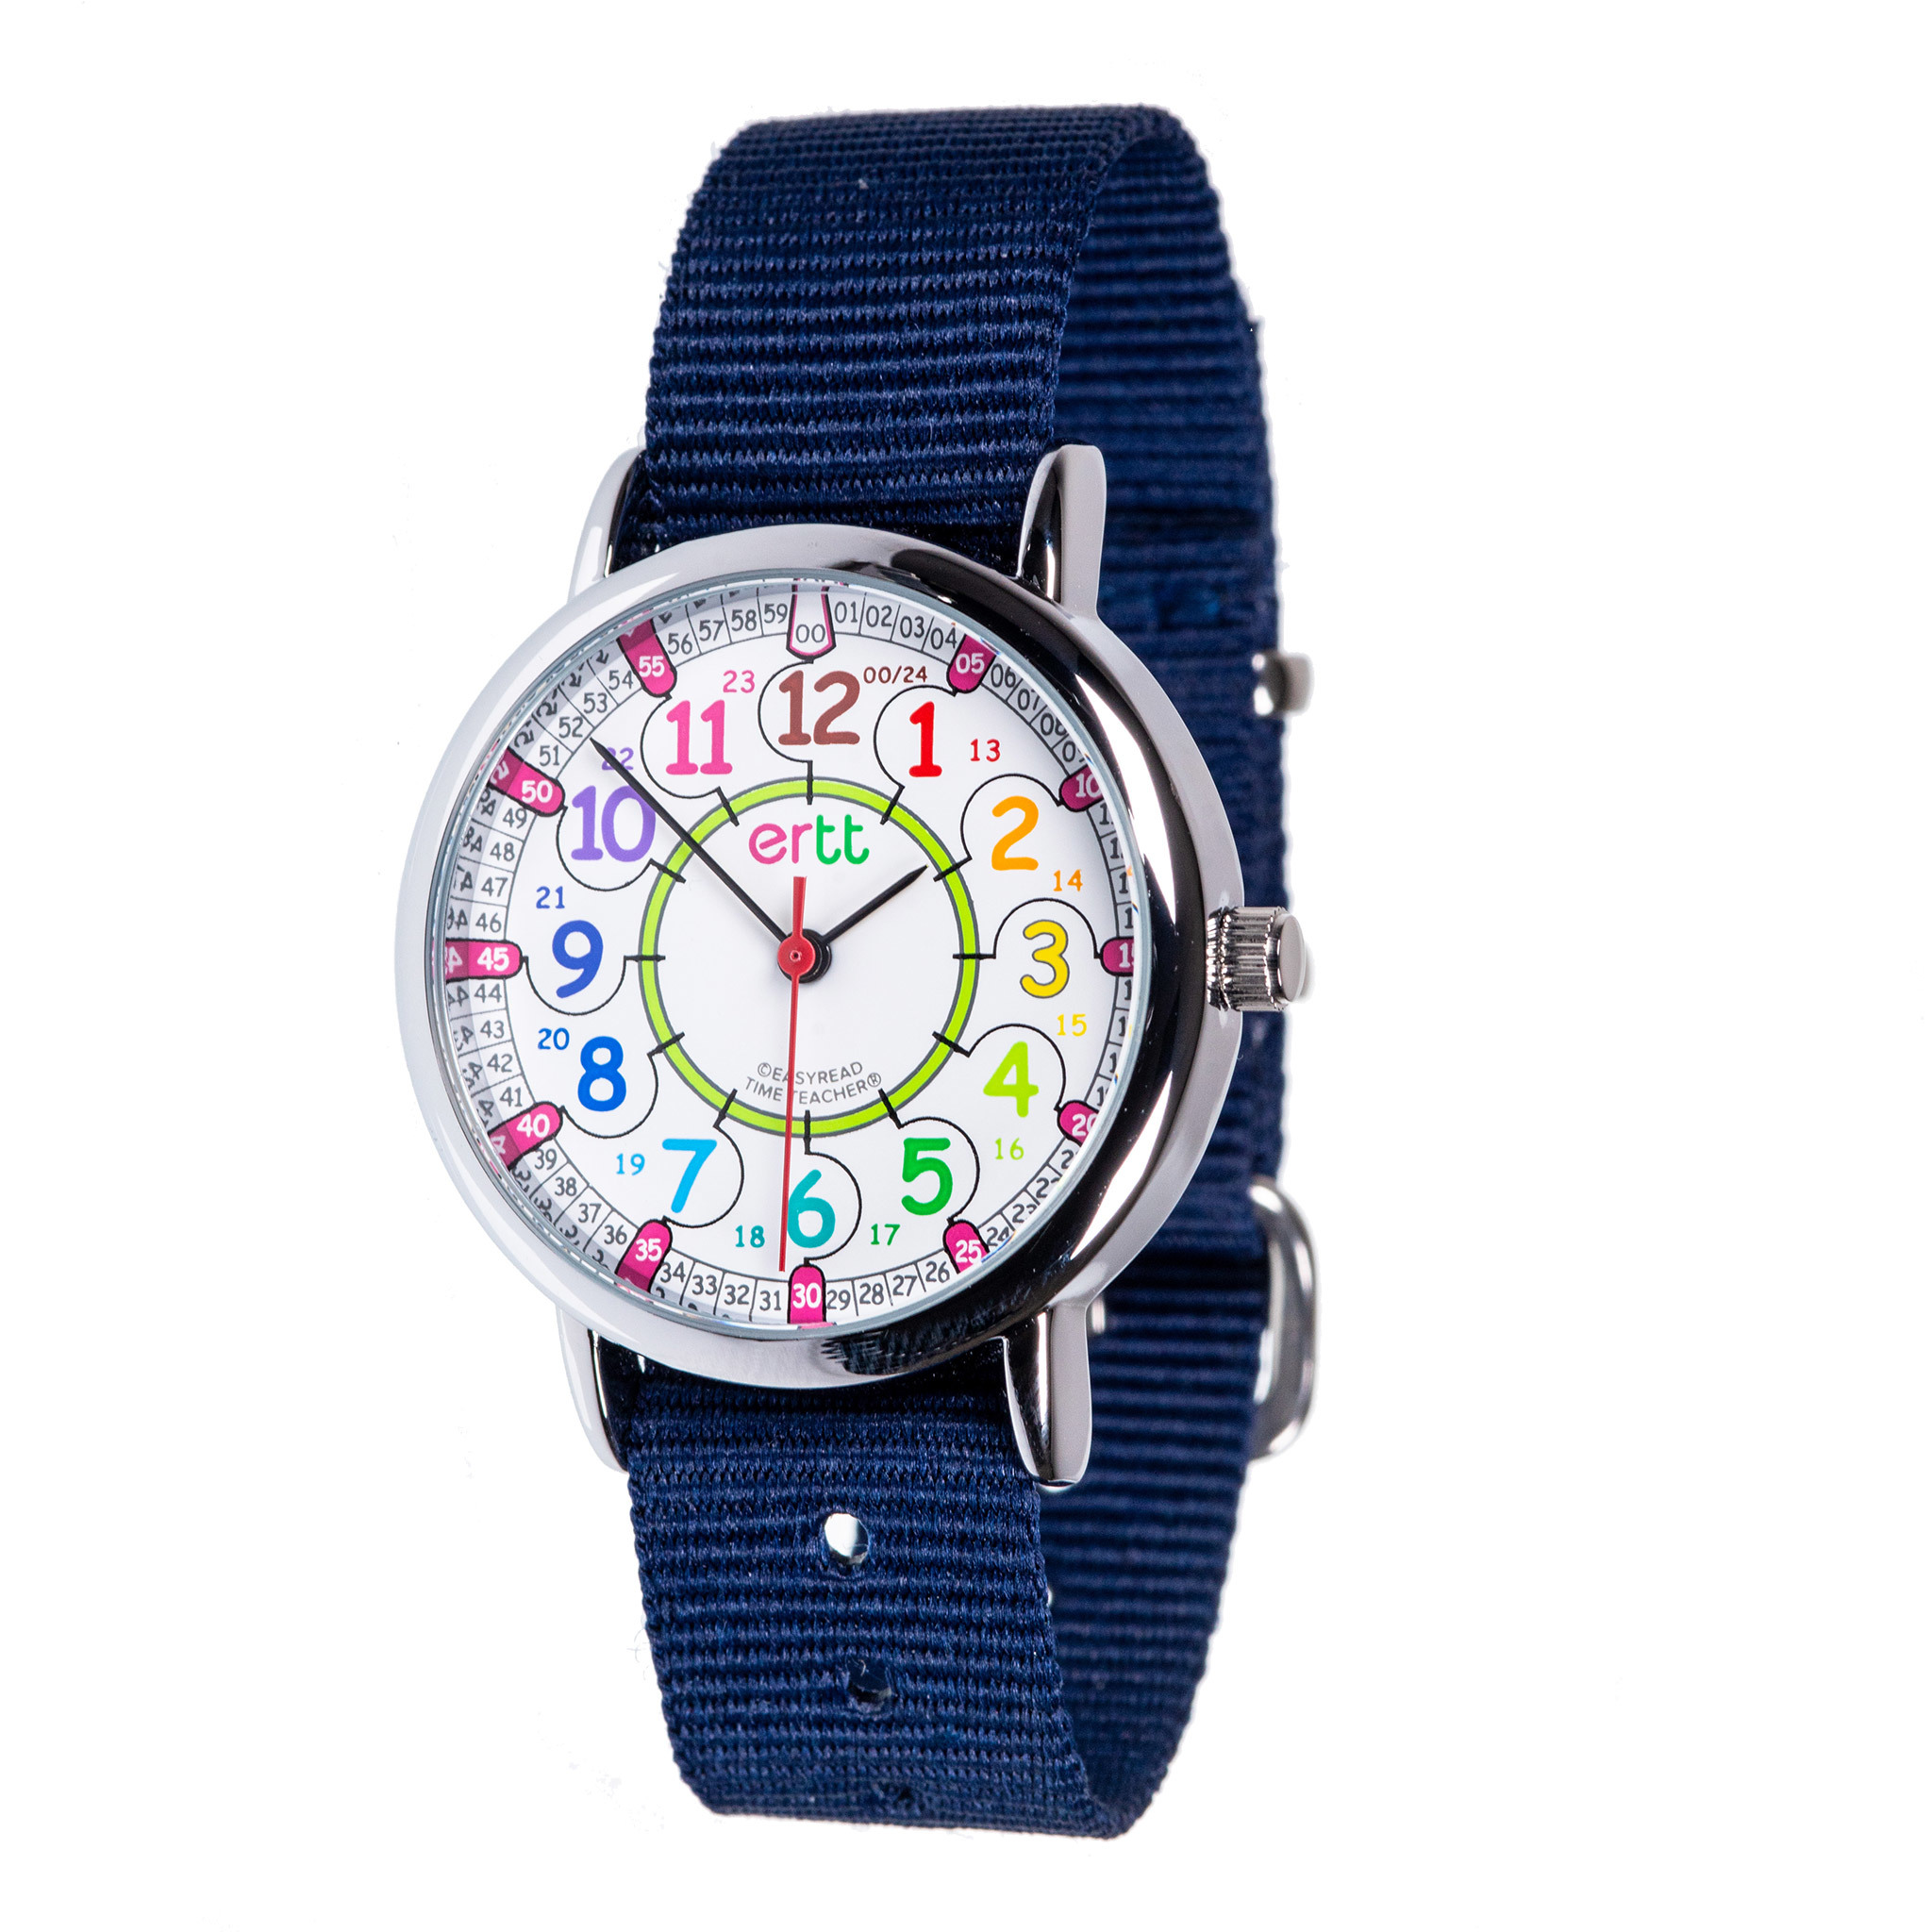 Watch - Past/To Rainbow Face with 12-24 Hour Format - Navy Blue Strap